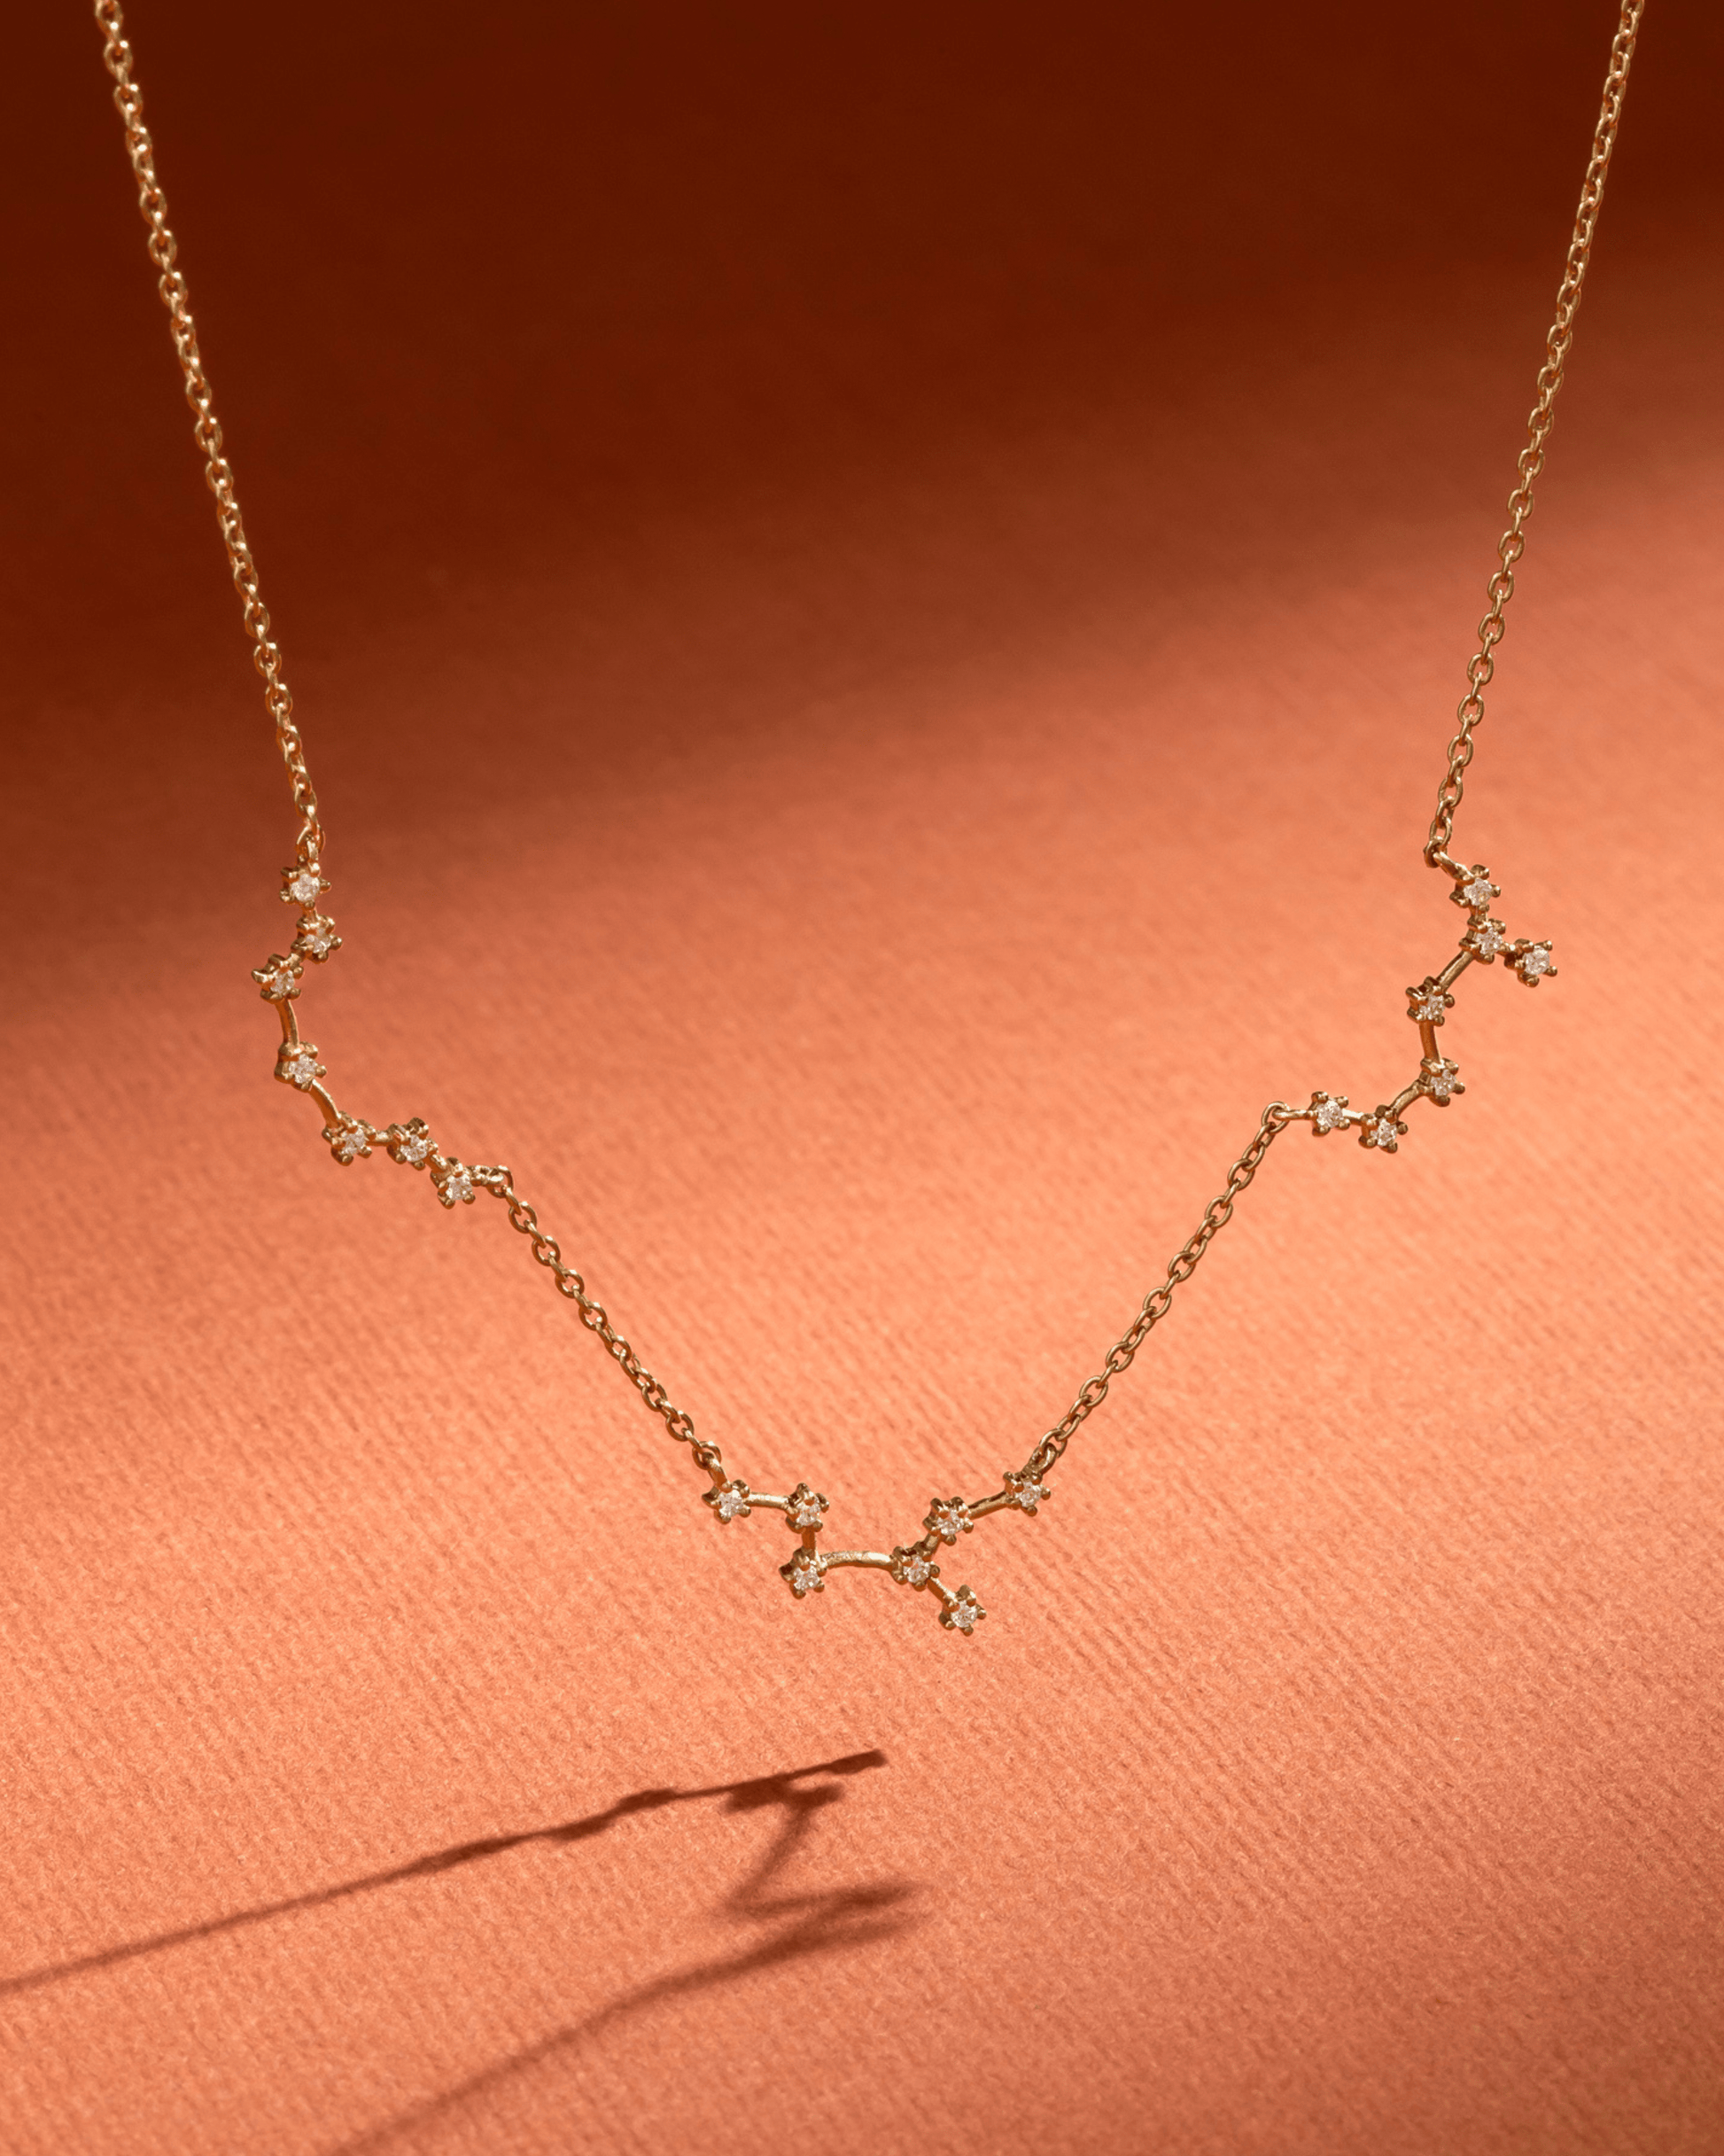 Constellation Necklace with Diamonds - 18K Gold Vermeil Necklaces magal-dev 